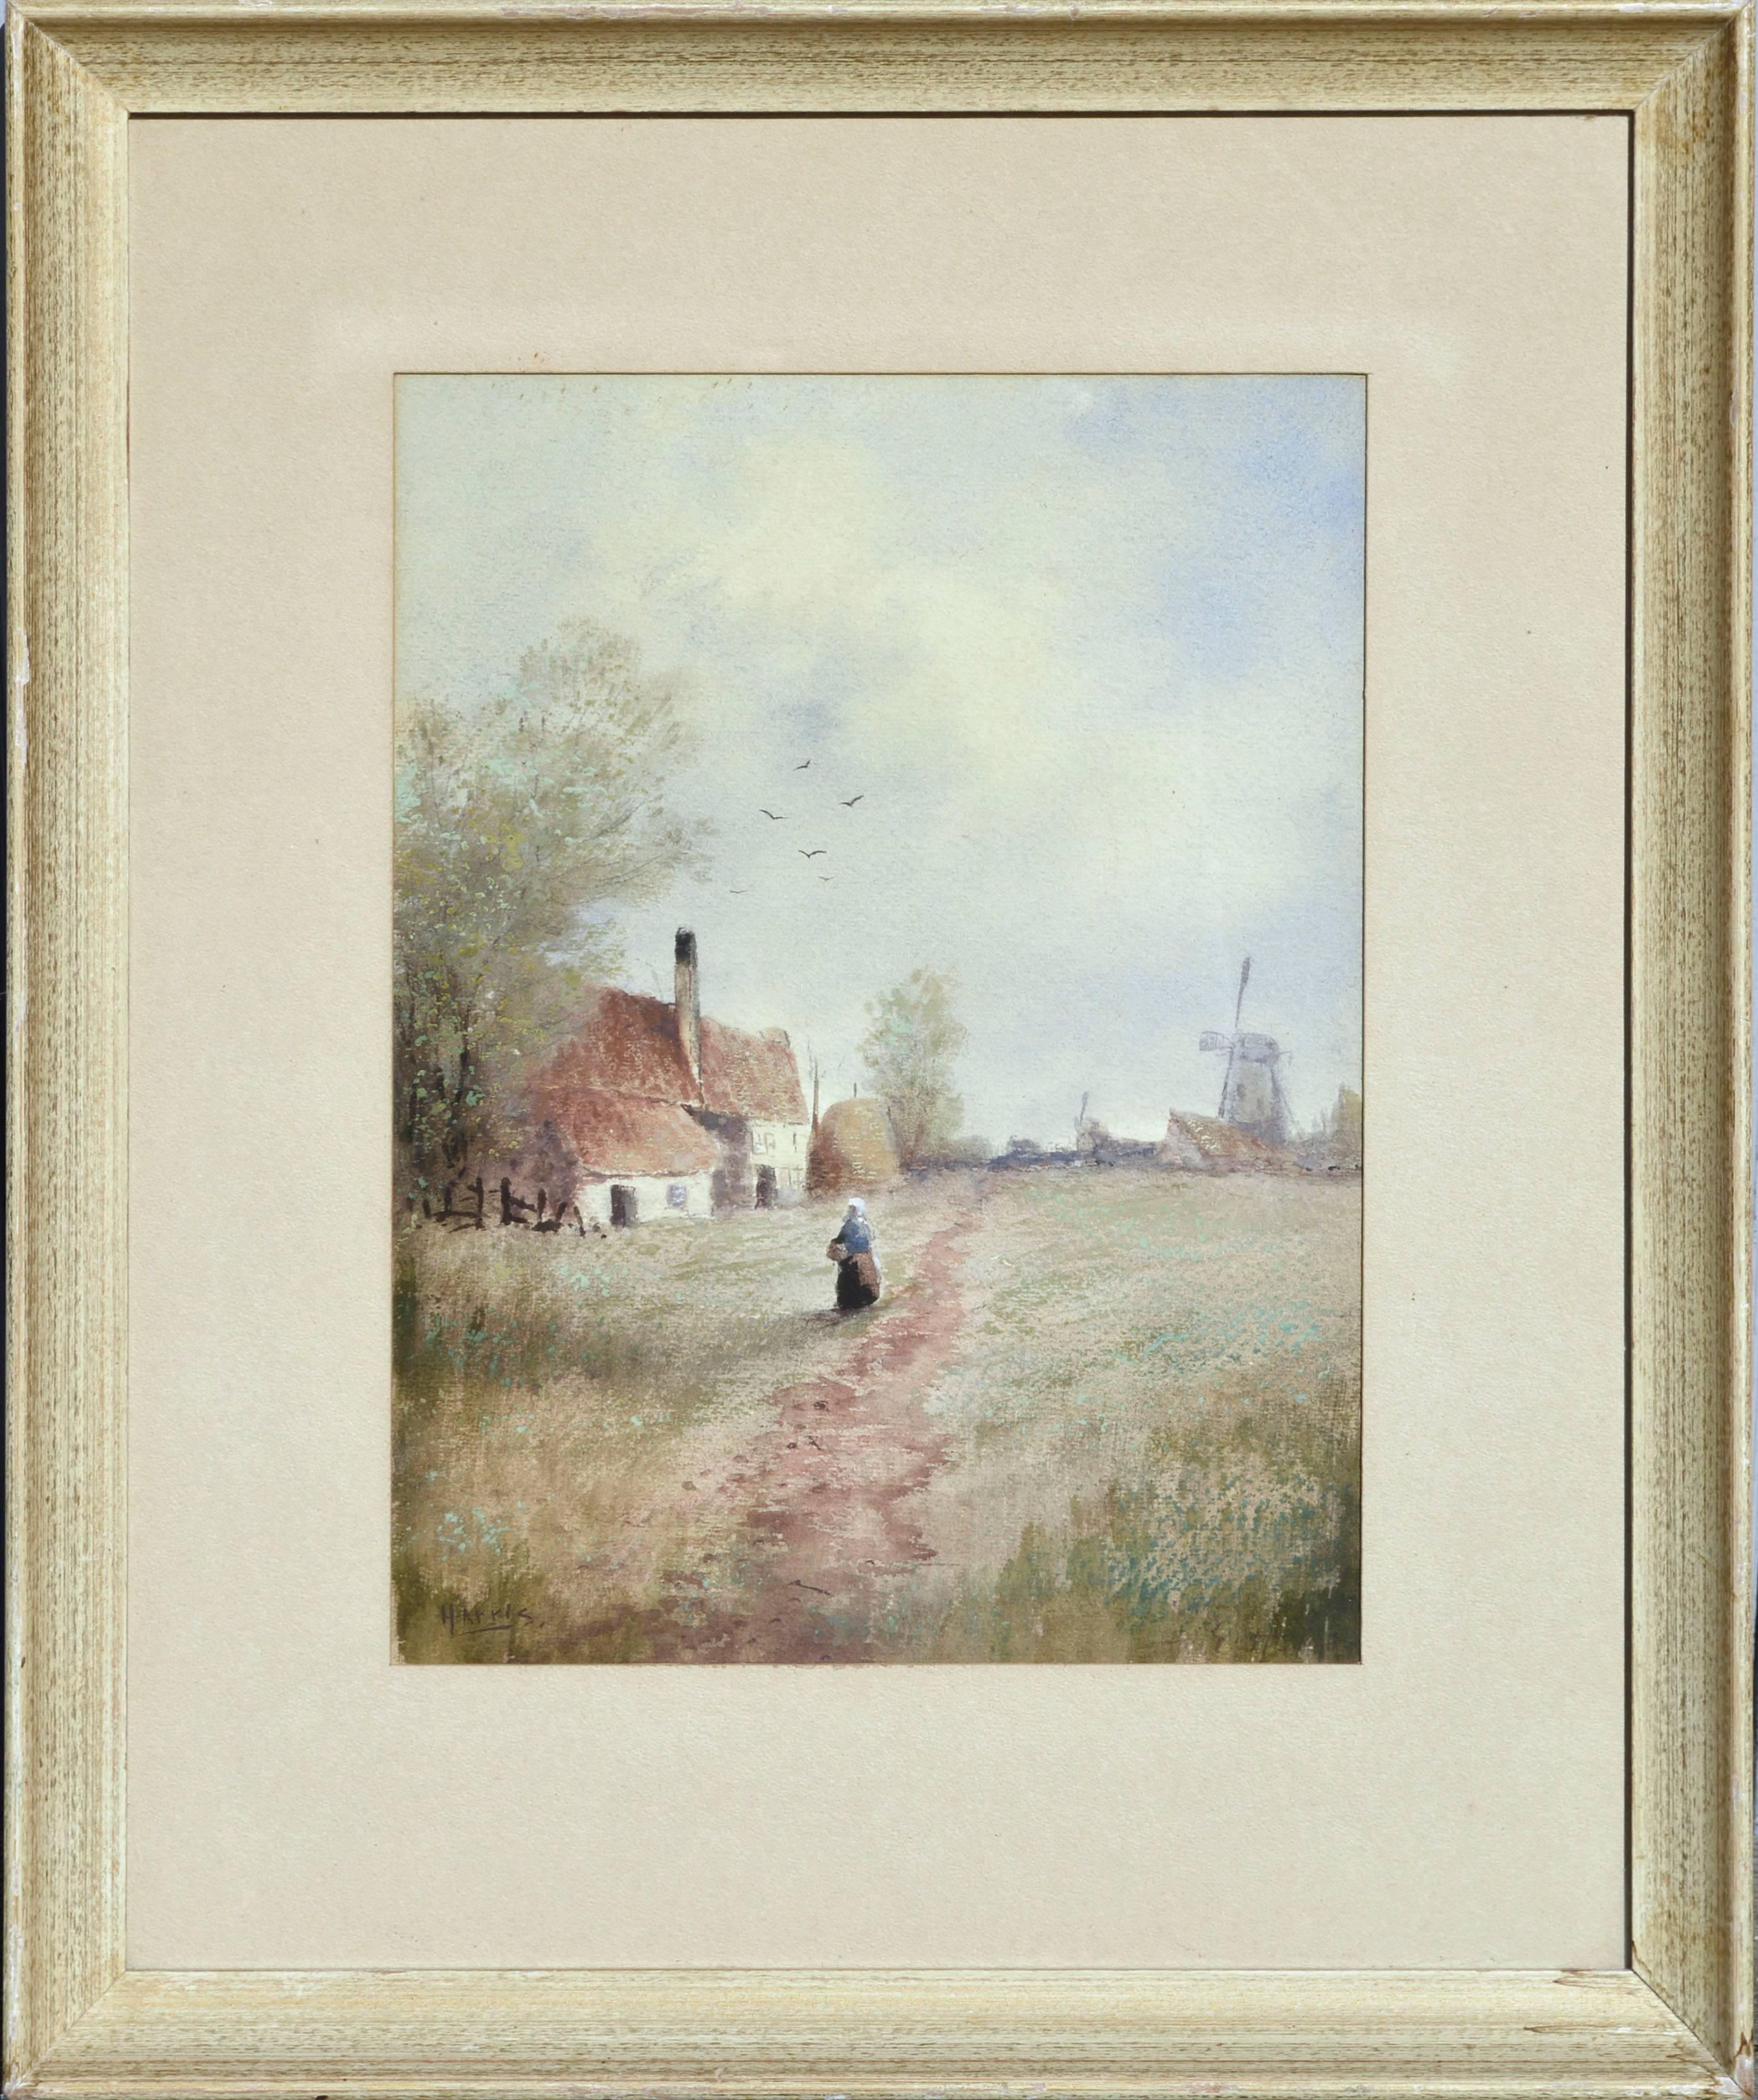 Kenneth Harris Landscape Painting - Woman and a Windmill, Mid Century Figurative Landscape 